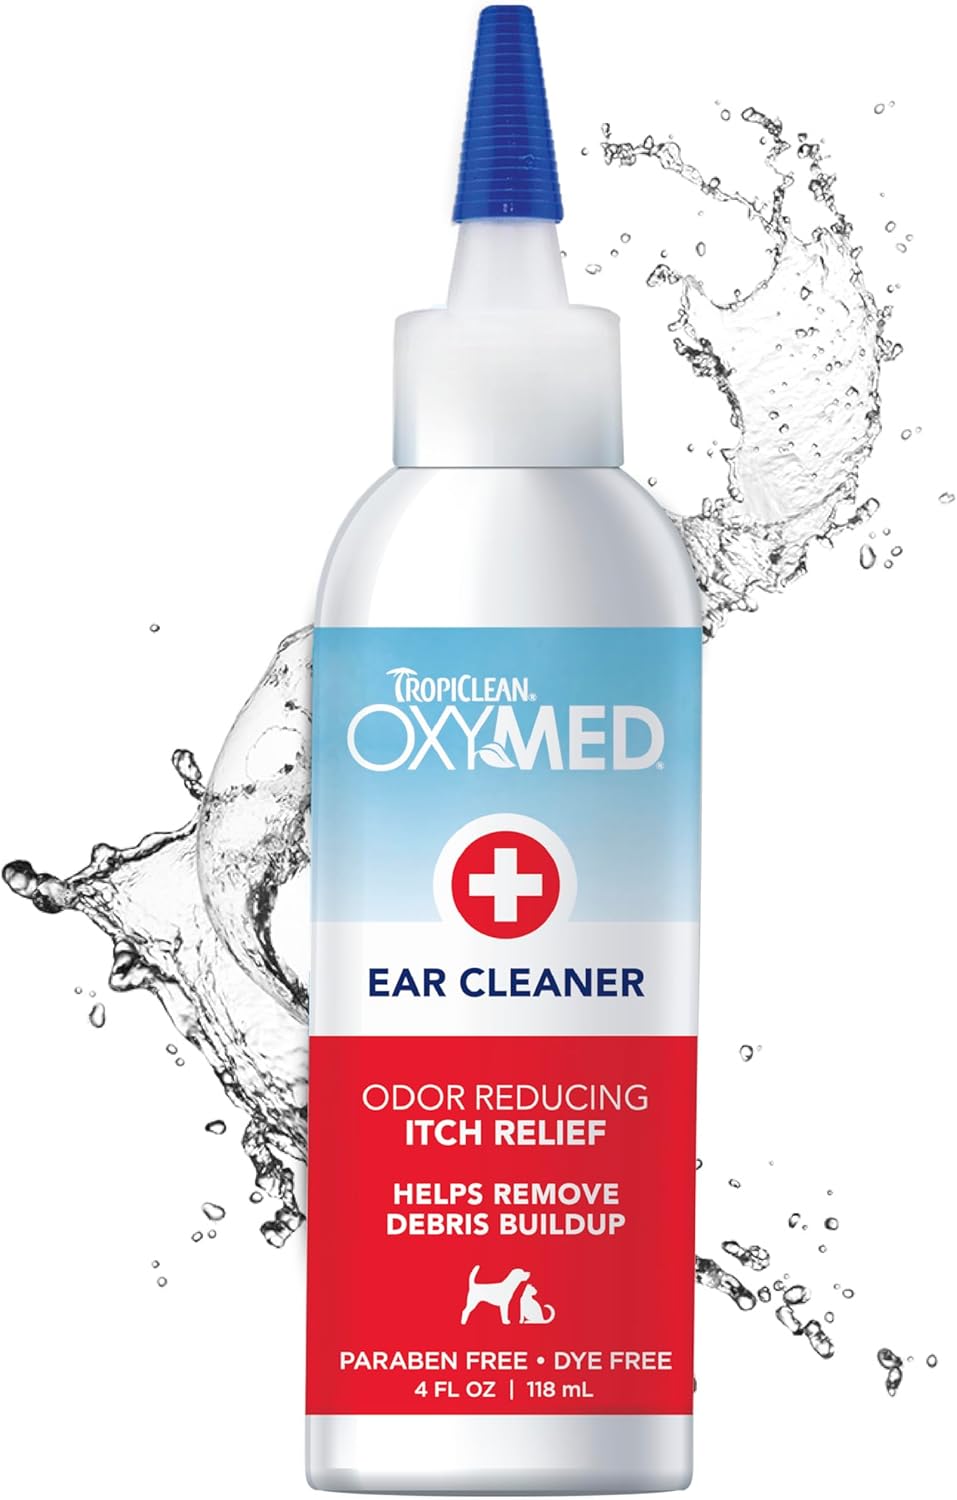 TropiClean Oxymed Cat & Dog Ear Cleaner Solution - Preventative Ear Infection Treatment For Dogs & Cats 4 Ounce